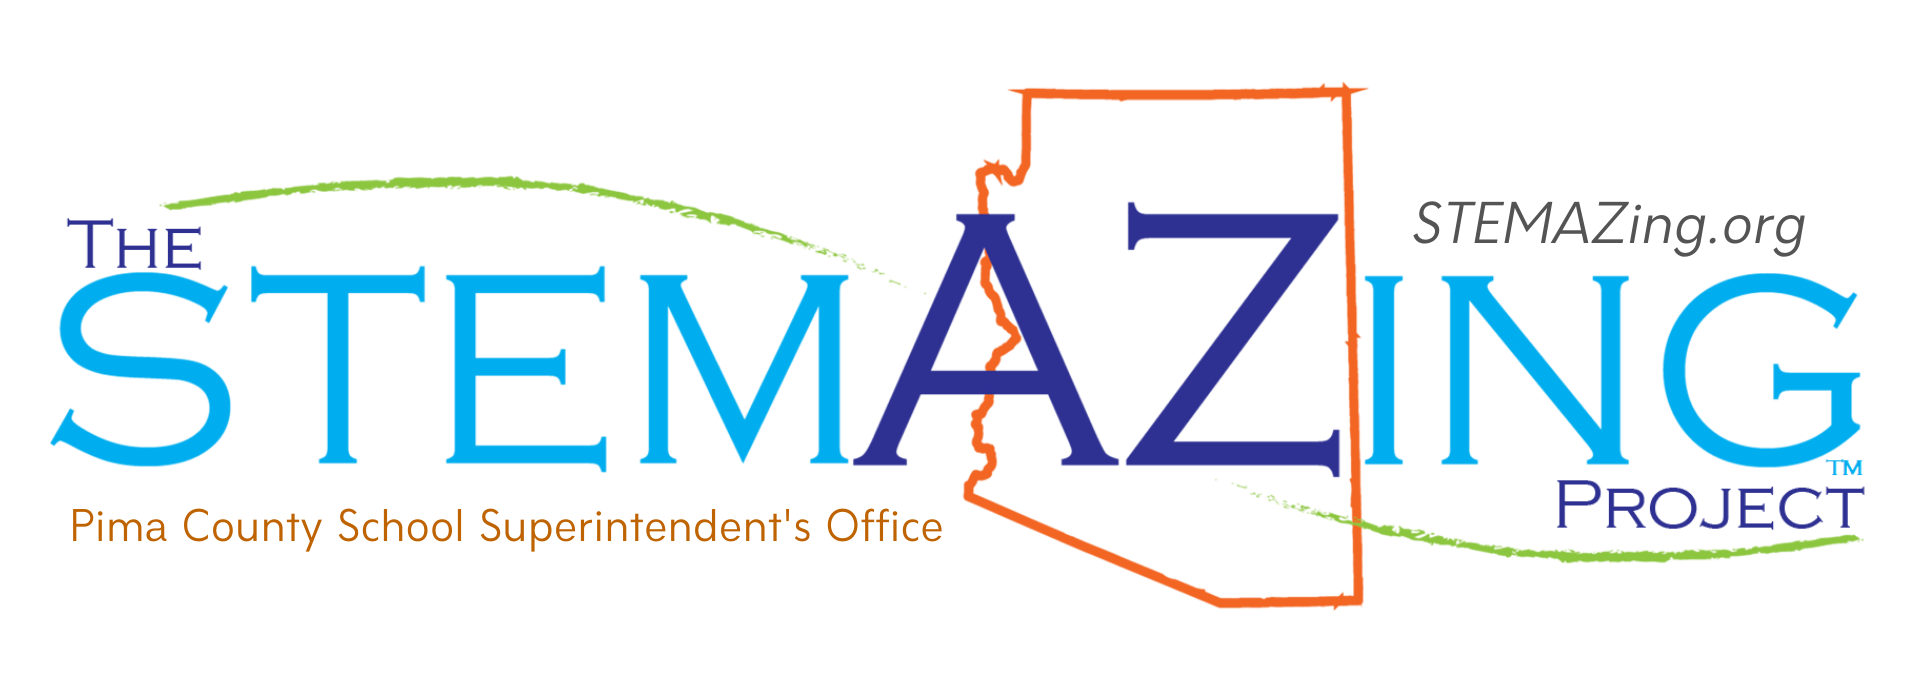 The STEMAZing Project an initiative at the Pima County School Superintendent's Office website STEMAZing.org